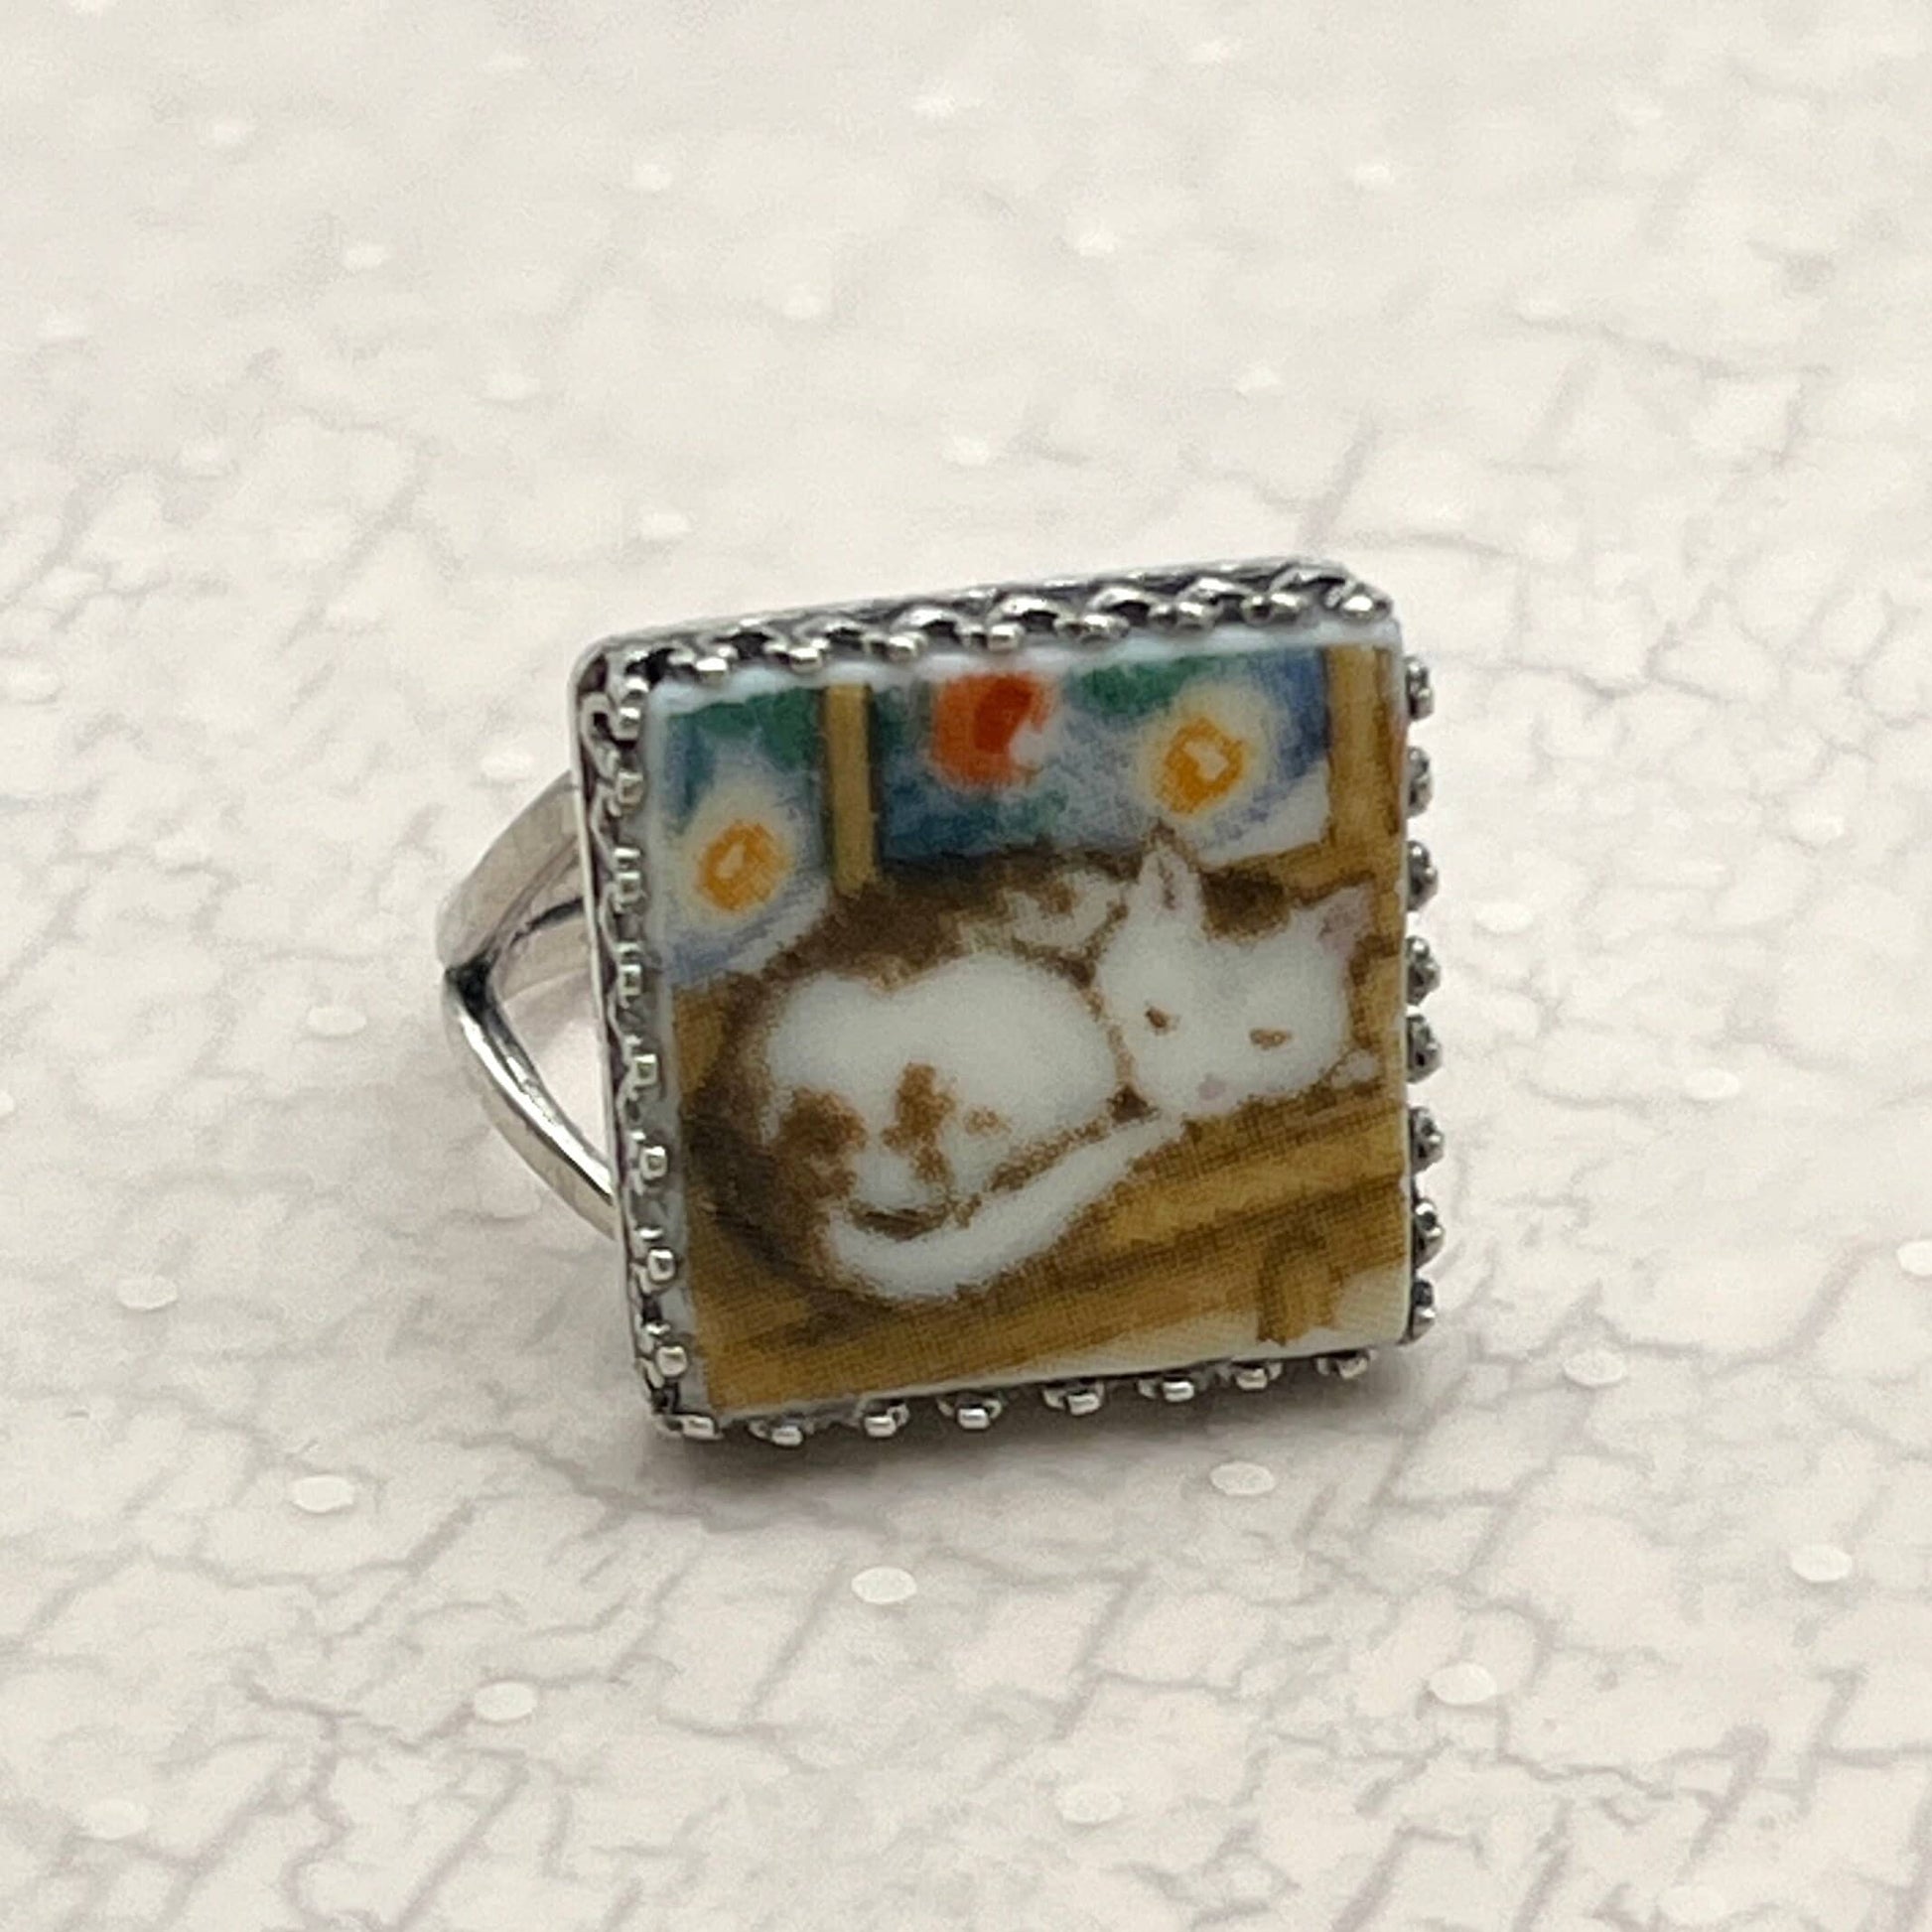 Silver Cat Ring, Napping Kitty, Broken China Jewelry Ring, Sterling Silver Rings, Unique Cat Jewelry Gifts for Women, Adjustable Ring